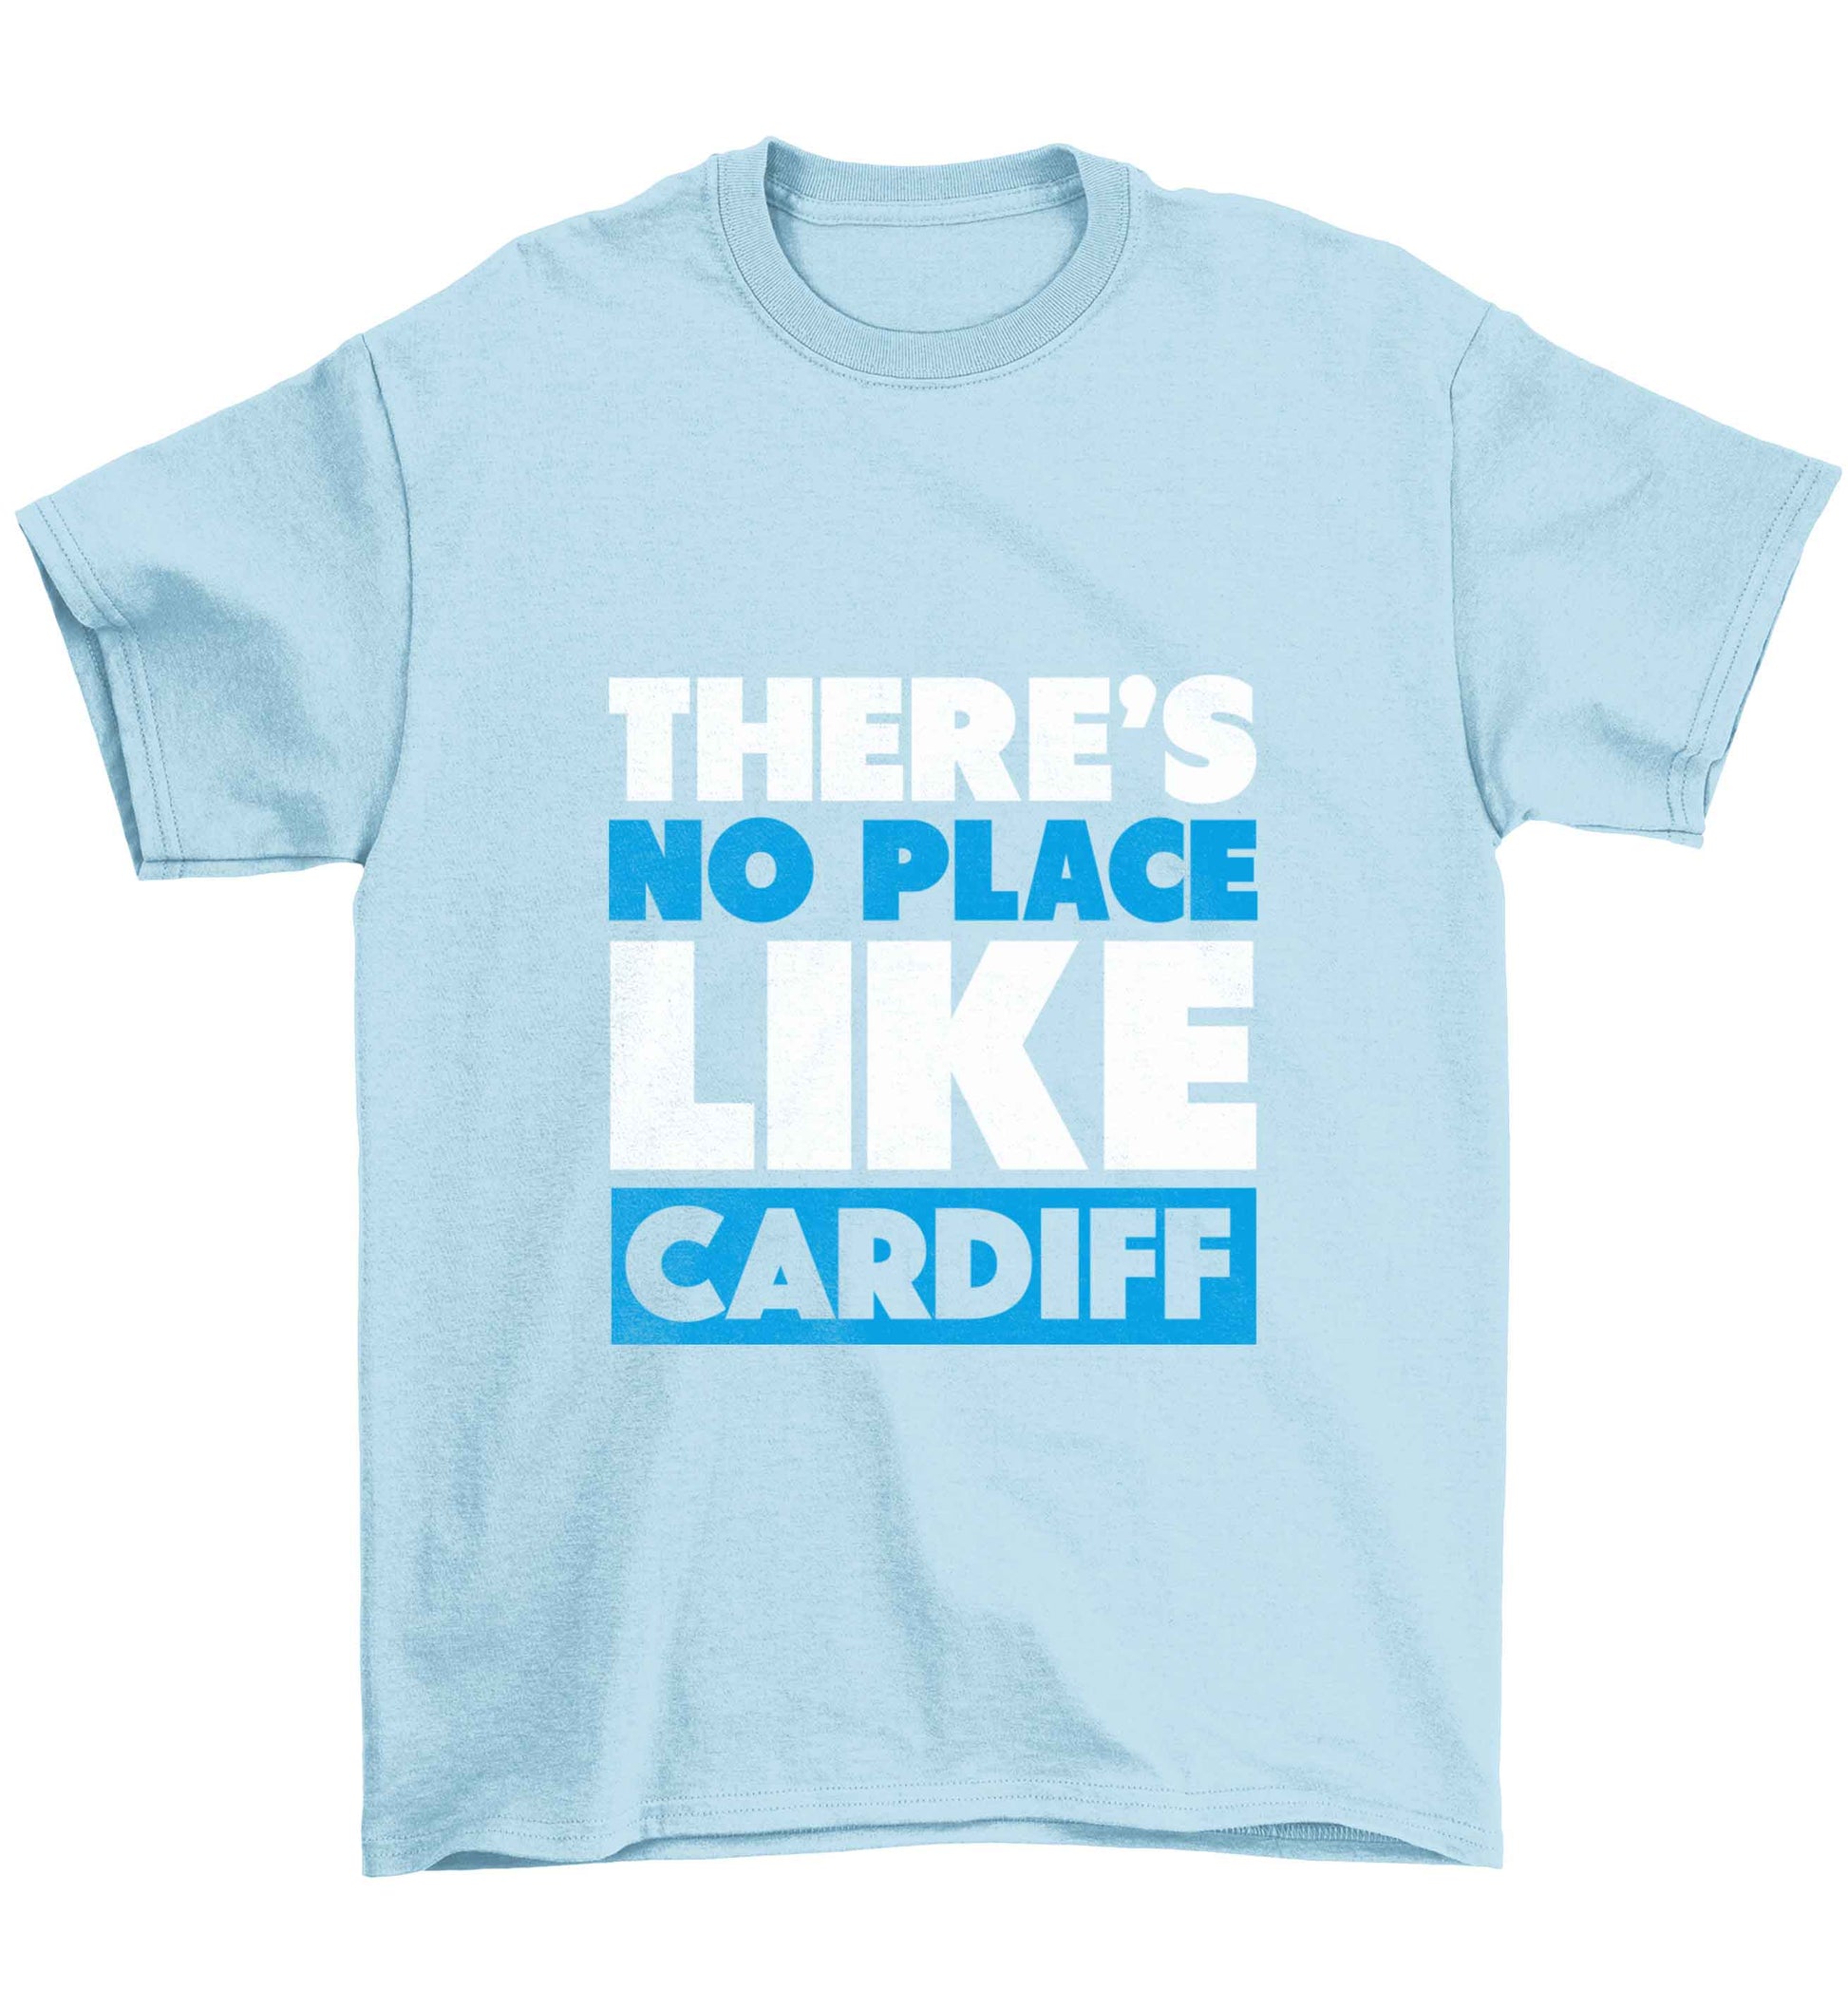 There's no place like Cardiff Children's light blue Tshirt 12-13 Years